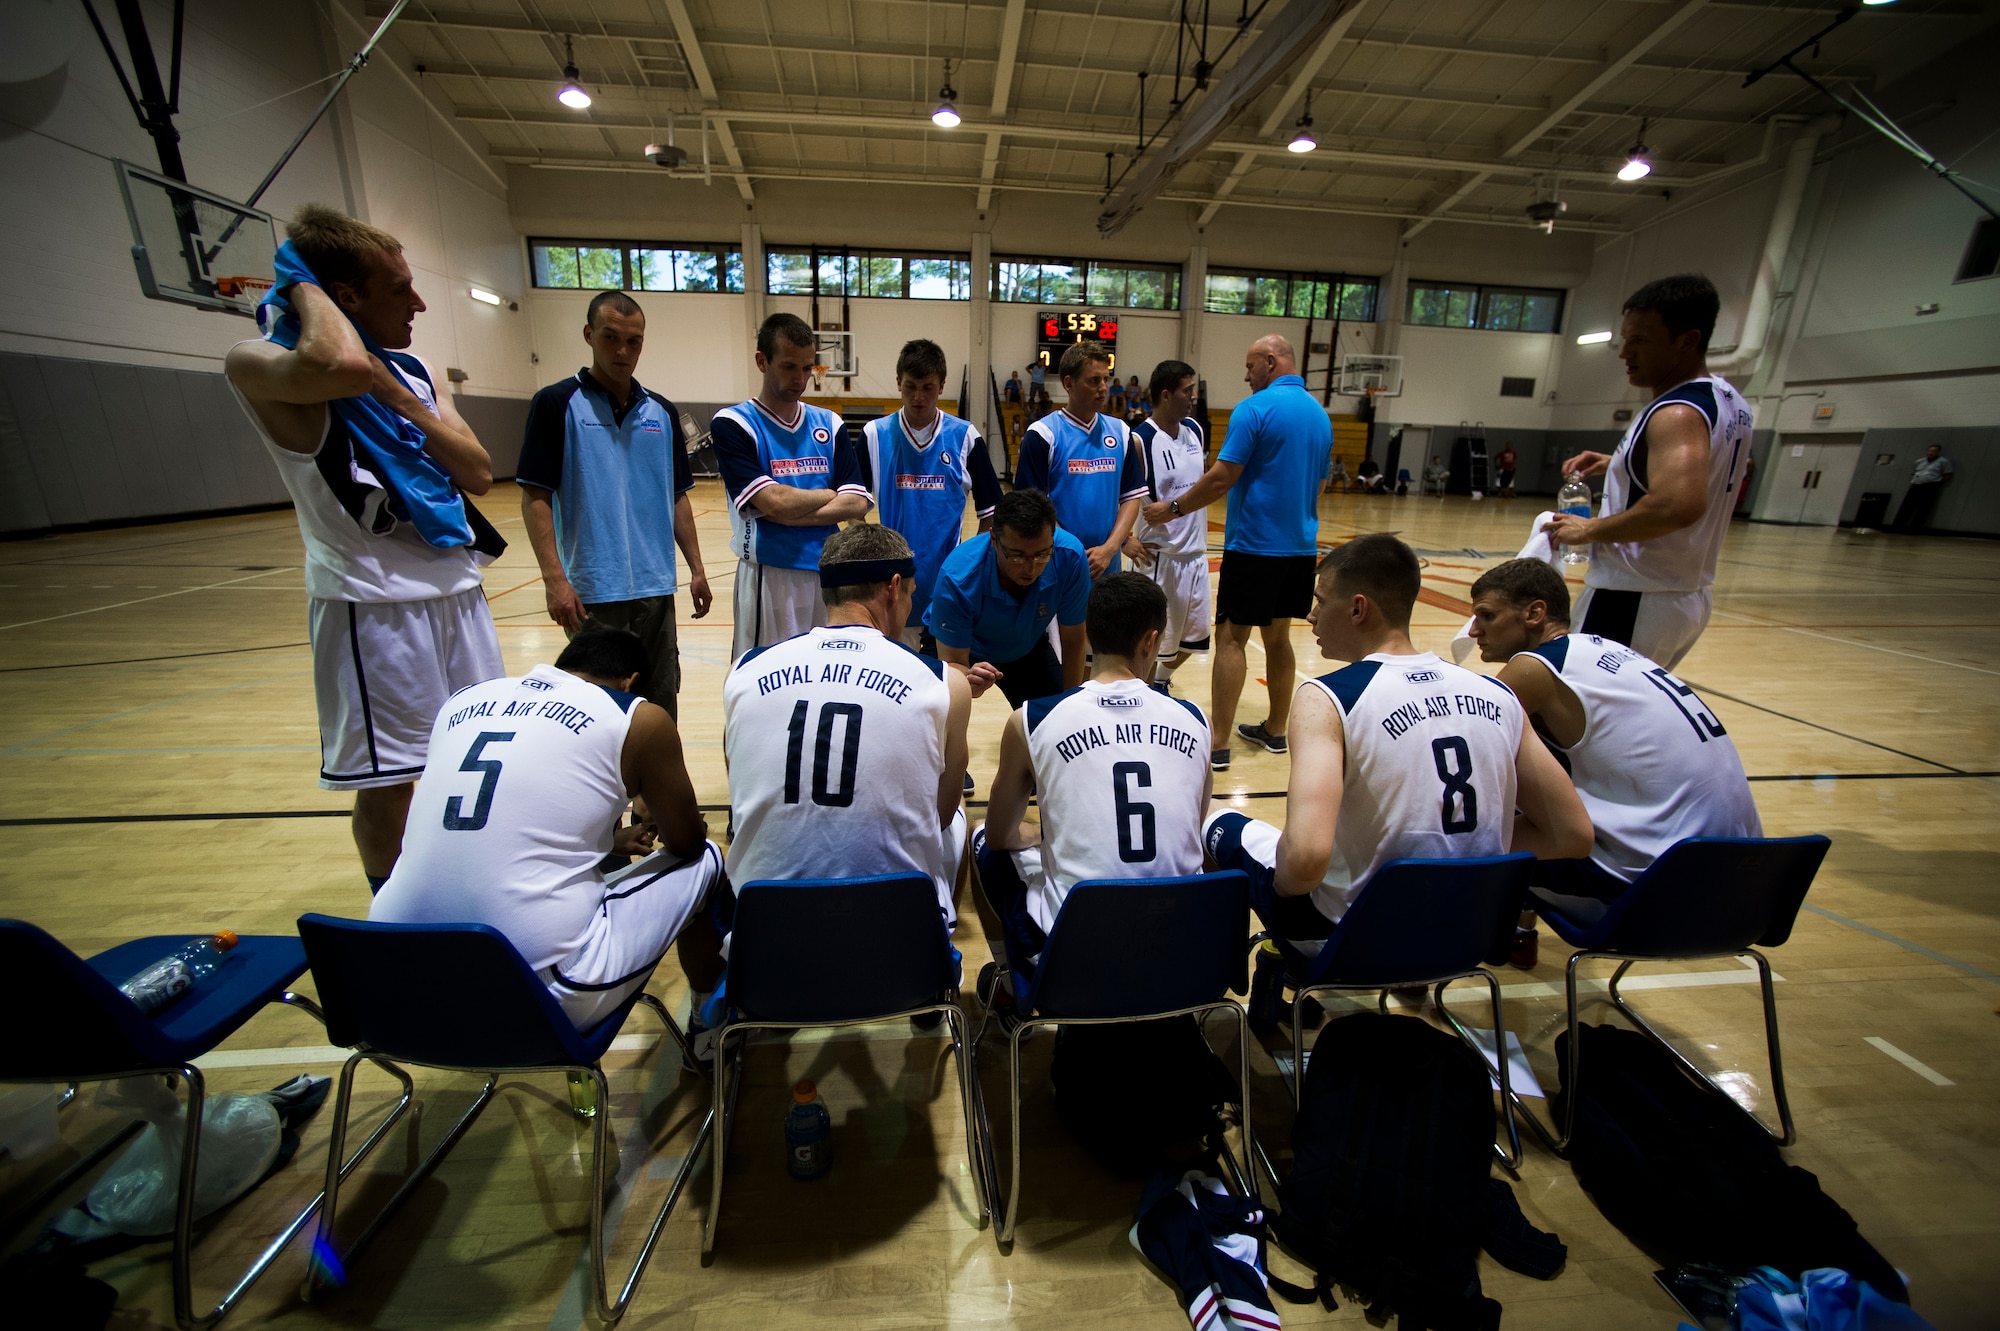 U.K. Royal Air Force Flight Lt. Richie Weeks, coach of the RAF basketball team, talks to his team during a timeout at the Aderholt Gym on Hurlburt Field, Fla., June 20, 2012. The RAF basketball teams traveled to Hurlburt Field for a two-week training camp. (U.S. Air Force photo by Airman 1st Class Christopher Williams) (RELEASED)